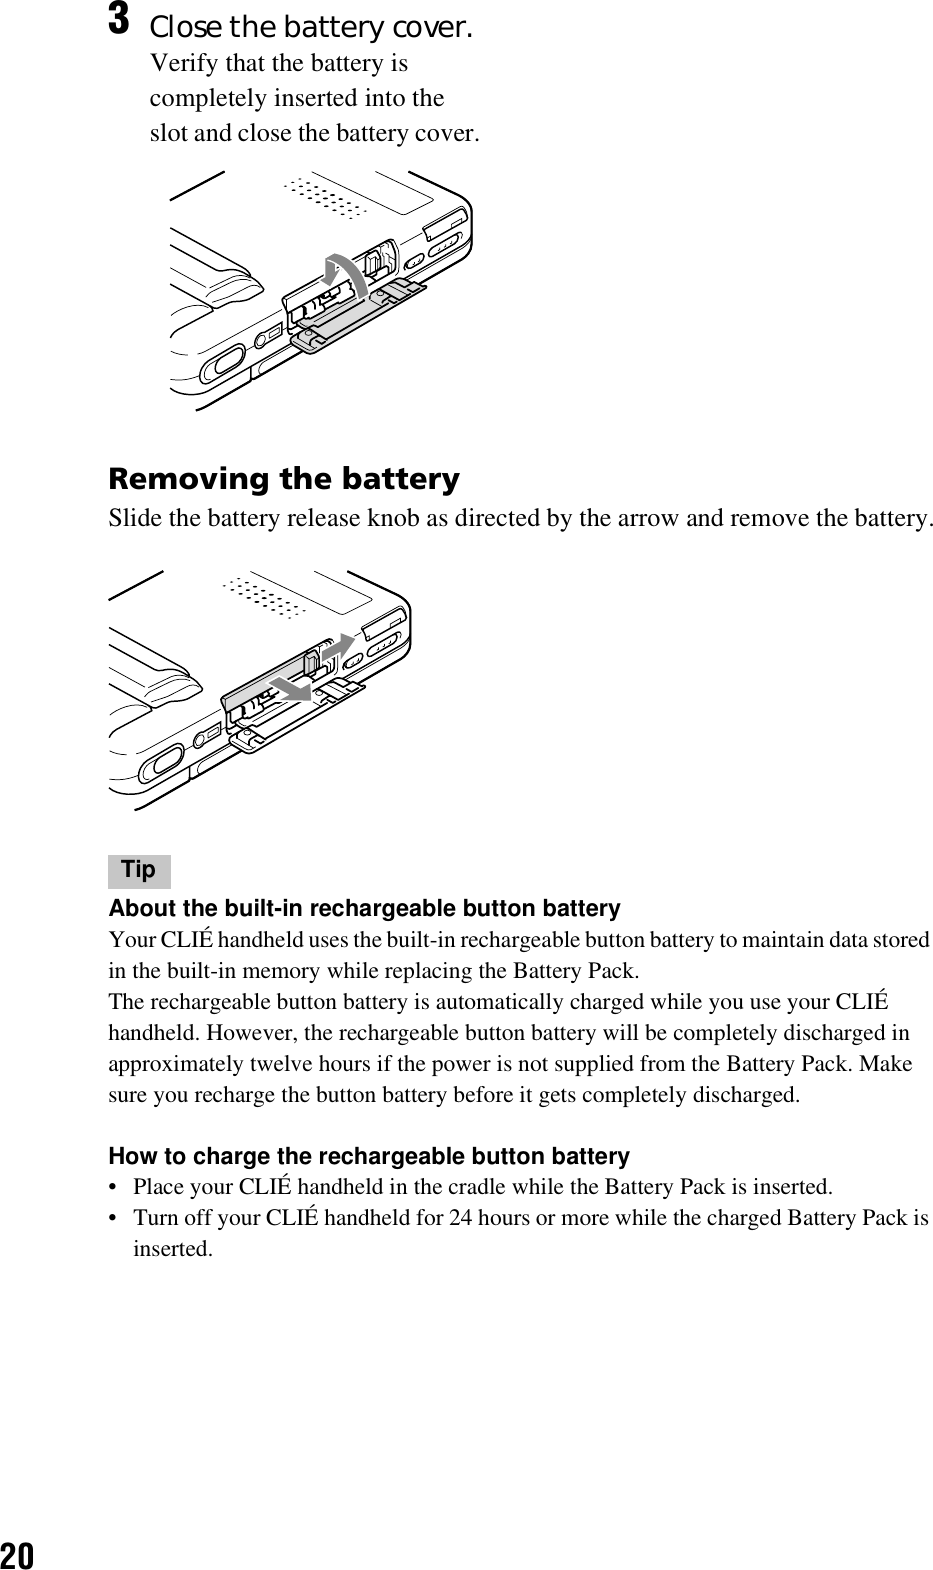 20Removing the batterySlide the battery release knob as directed by the arrow and remove the battery.TipAbout the built-in rechargeable button batteryYour CLIÉ handheld uses the built-in rechargeable button battery to maintain data stored in the built-in memory while replacing the Battery Pack.The rechargeable button battery is automatically charged while you use your CLIÉ handheld. However, the rechargeable button battery will be completely discharged in approximately twelve hours if the power is not supplied from the Battery Pack. Make sure you recharge the button battery before it gets completely discharged.How to charge the rechargeable button battery• Place your CLIÉ handheld in the cradle while the Battery Pack is inserted.• Turn off your CLIÉ handheld for 24 hours or more while the charged Battery Pack is inserted.3Close the battery cover.Verify that the battery is completely inserted into the slot and close the battery cover.